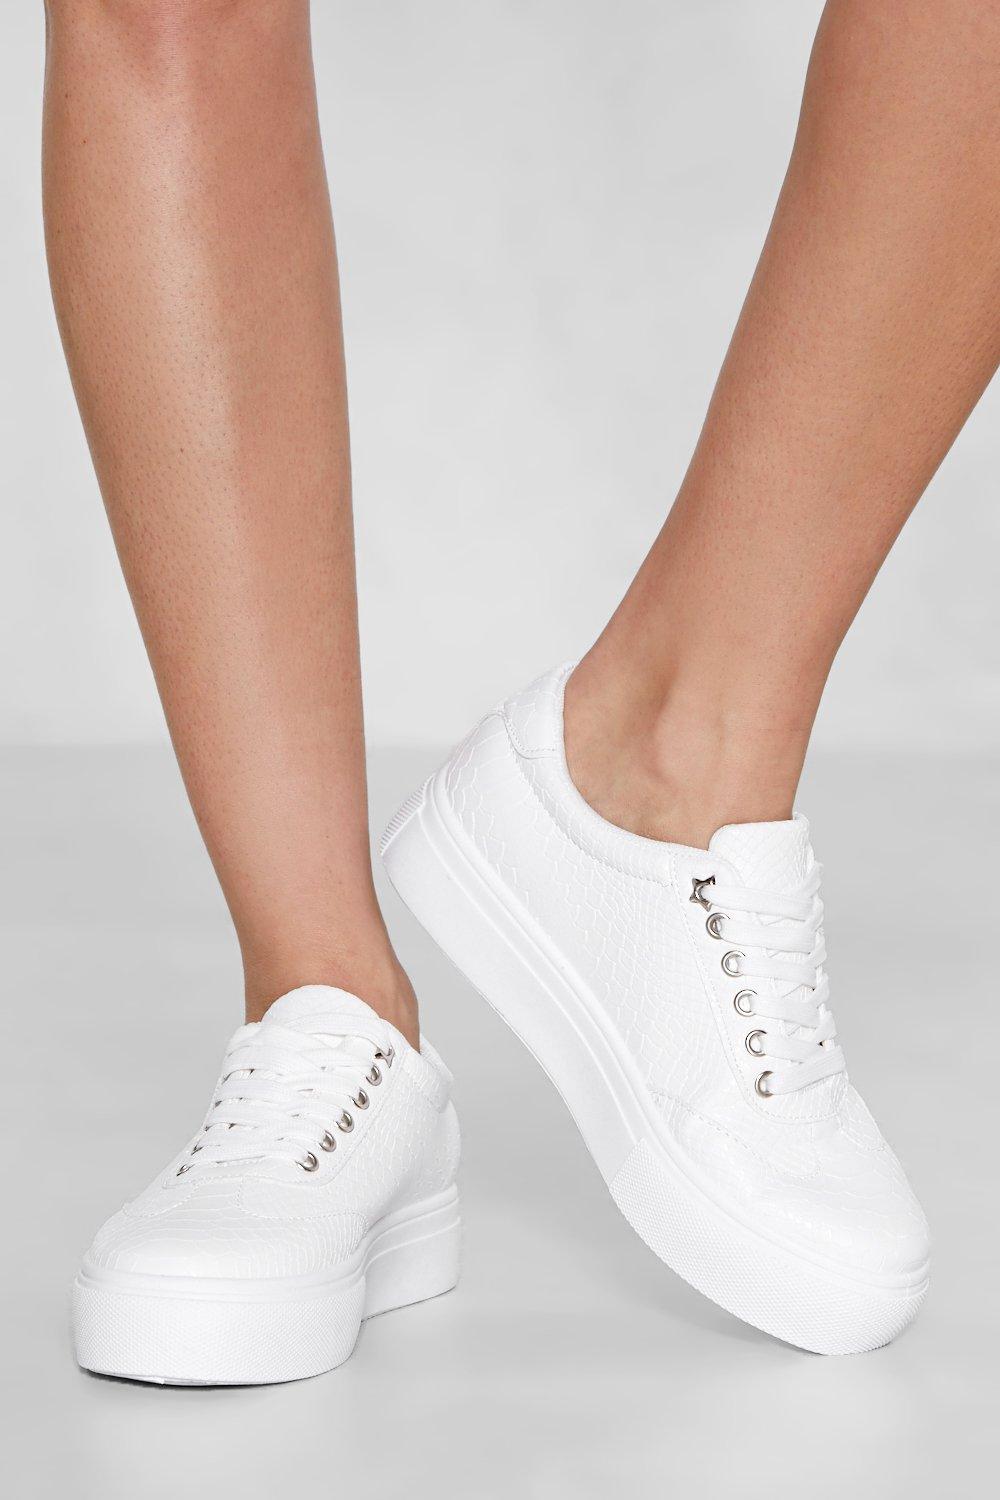 white faux leather slip on sneakers